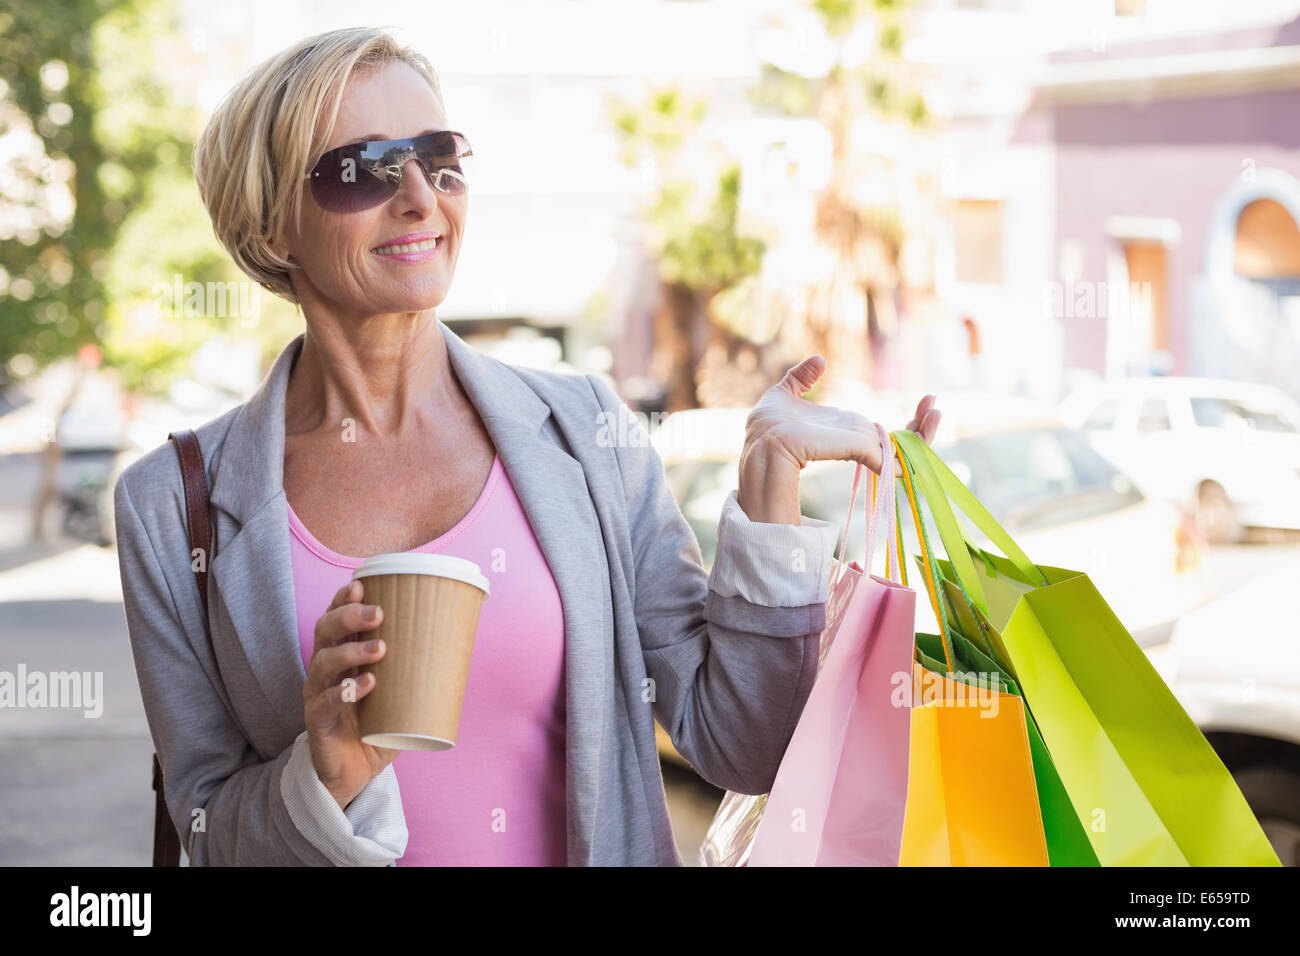 Happy mature woman walking with her shopping purchases Stock Photo